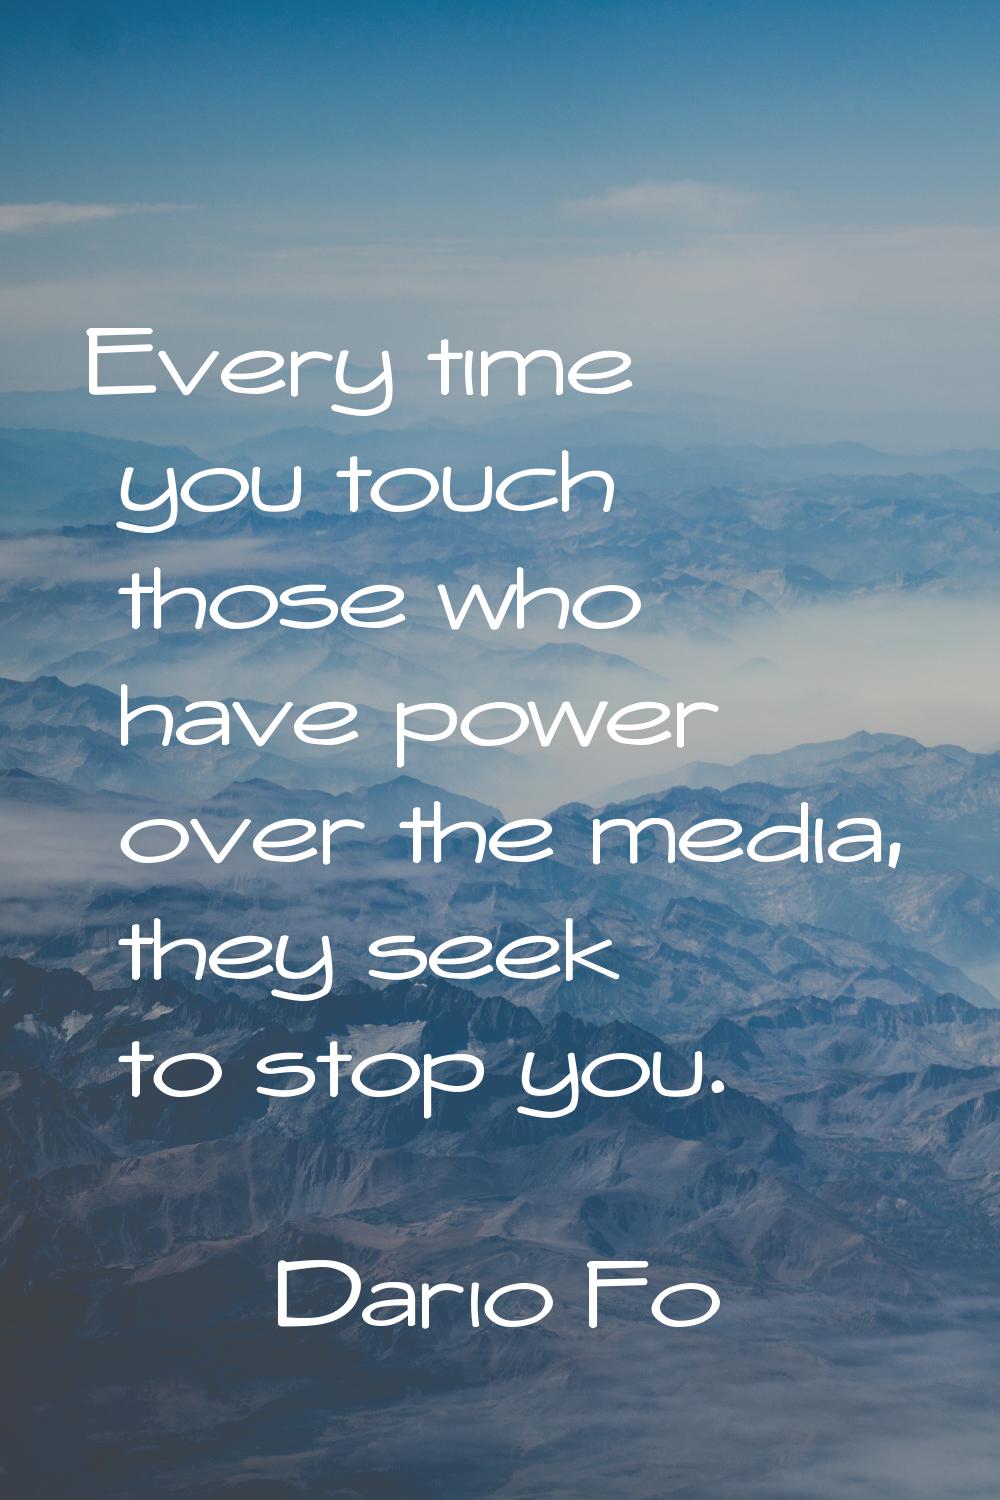 Every time you touch those who have power over the media, they seek to stop you.